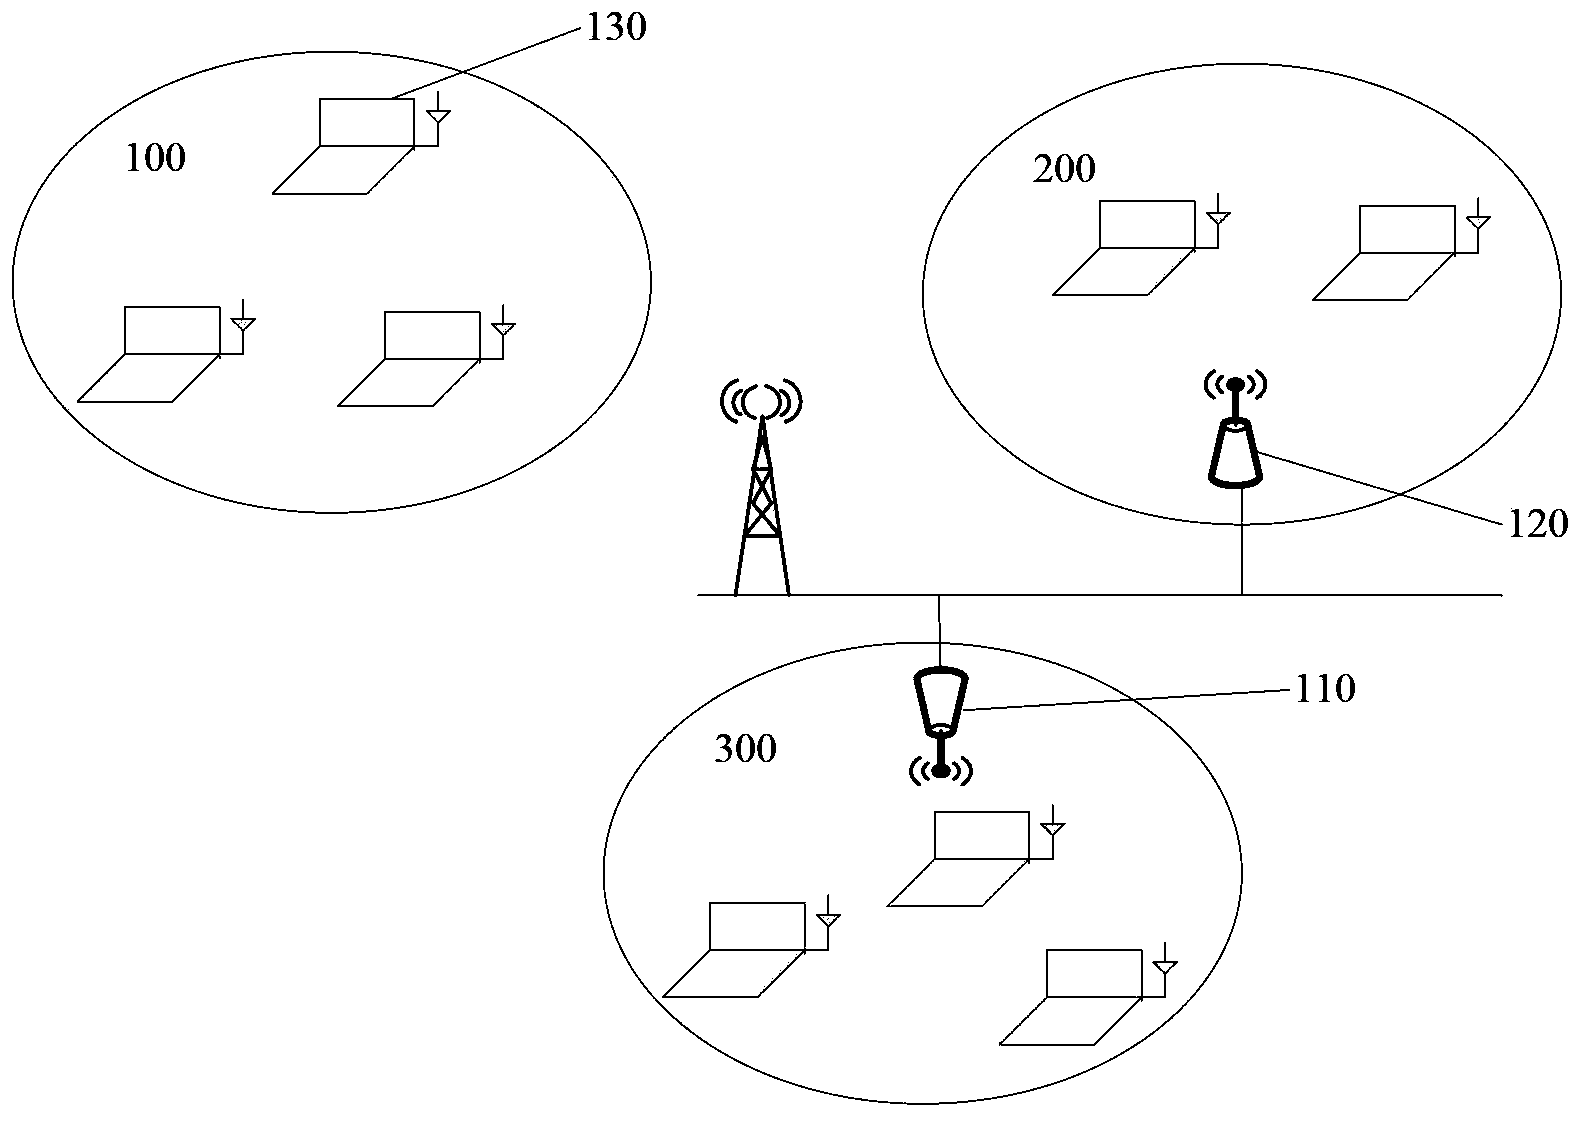 Contention window adjusting method and device